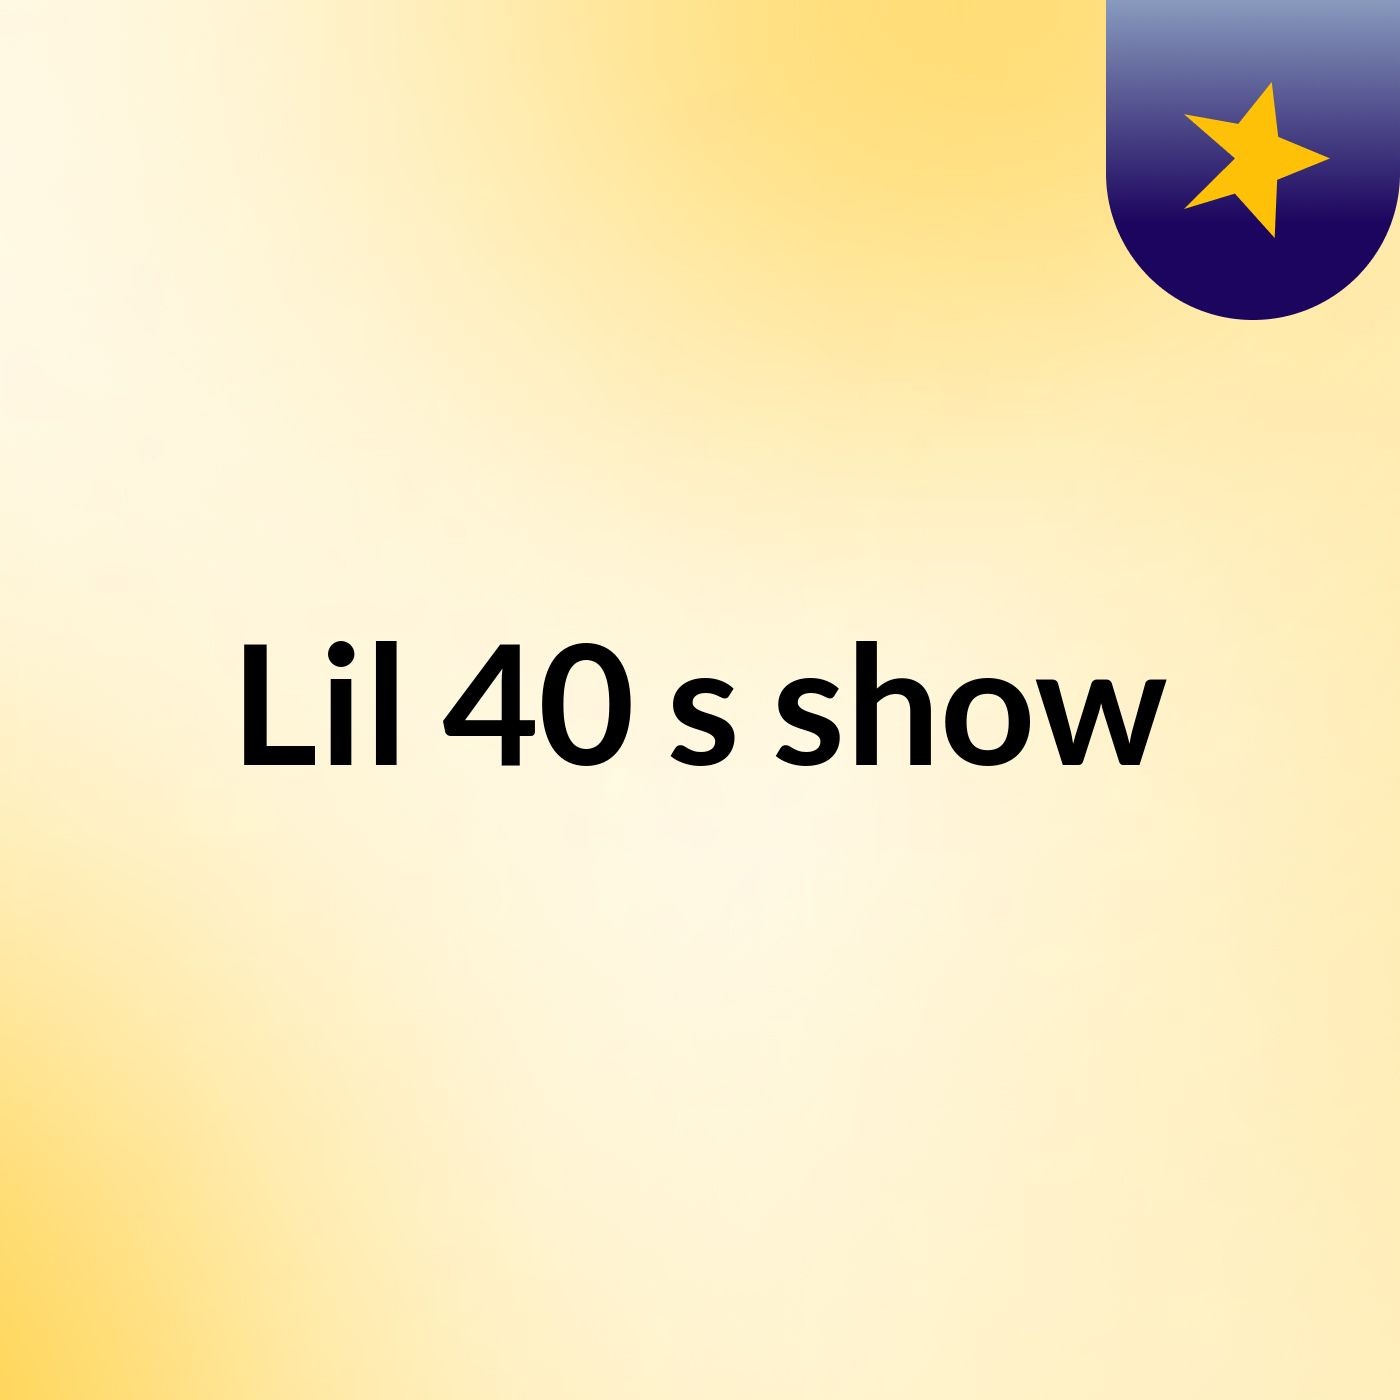 Lil 40's show